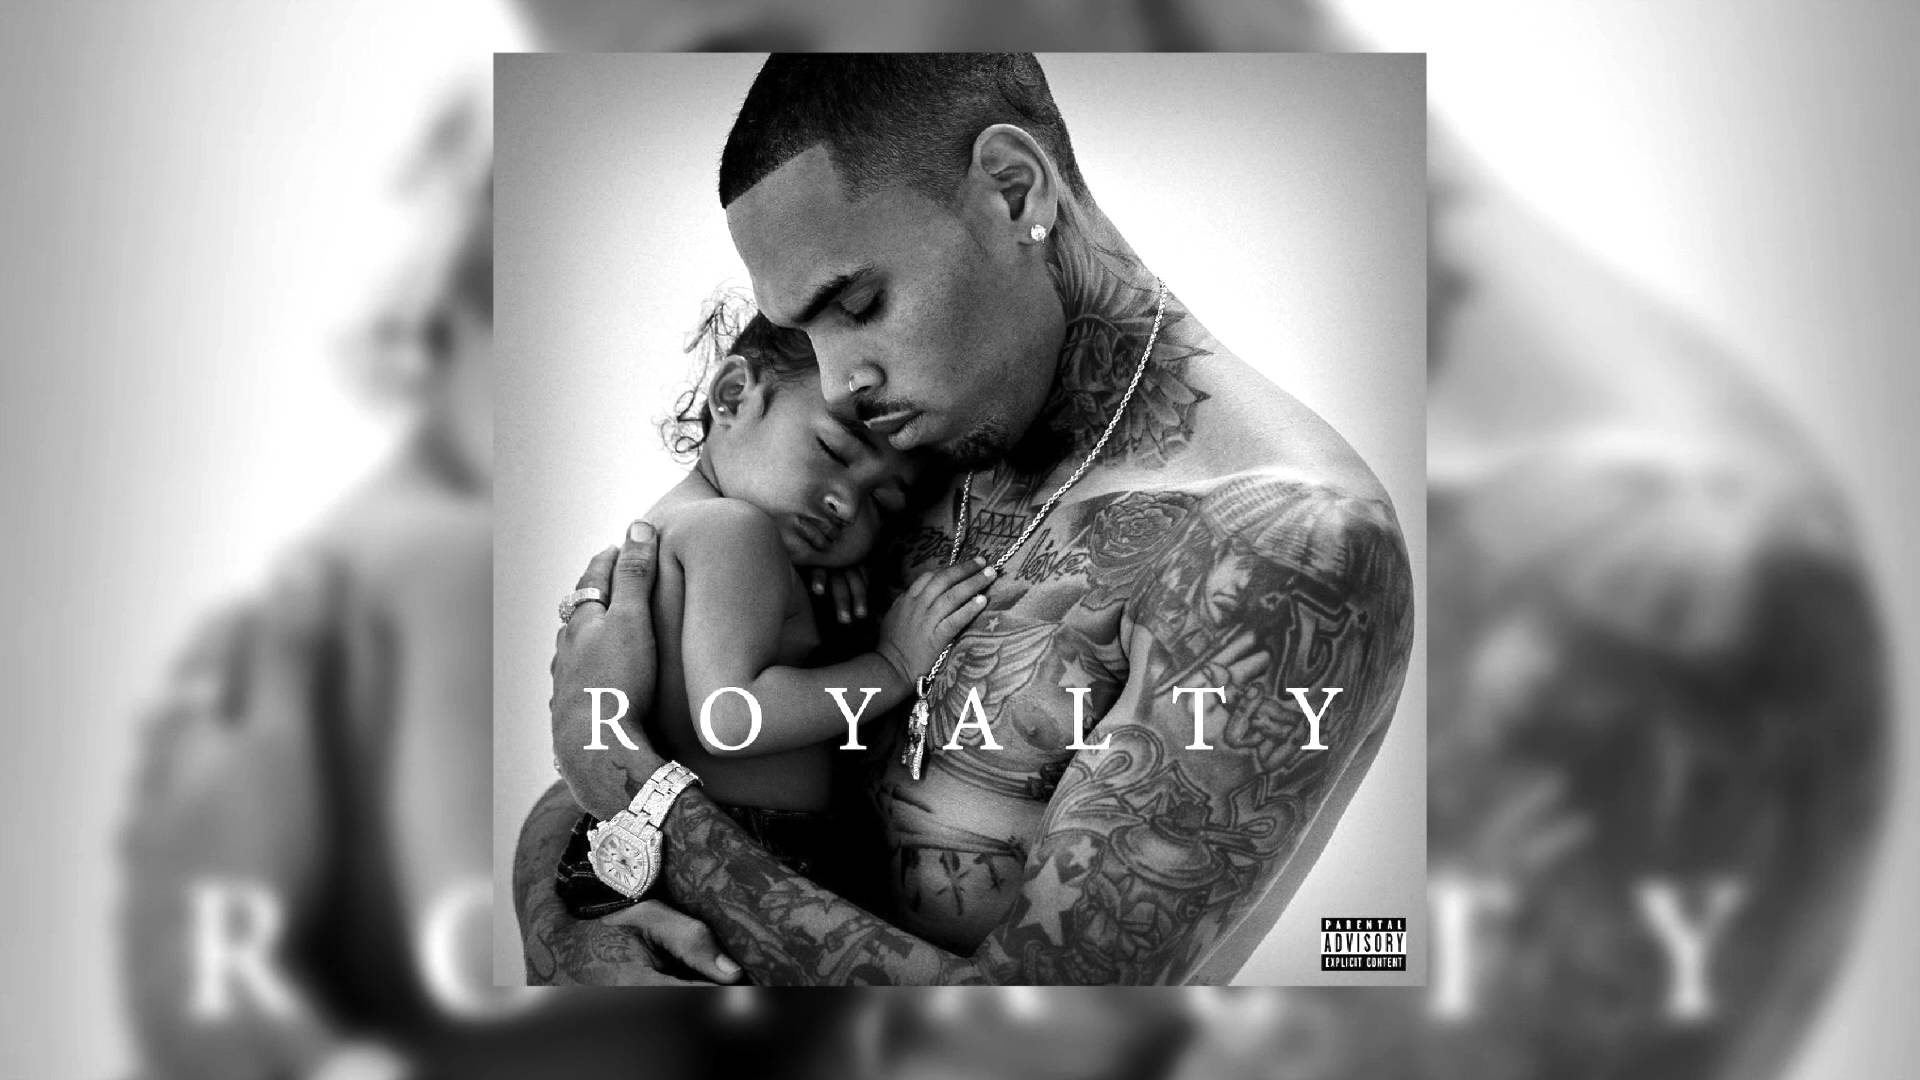 Royalty. Chris Brown Type Beat [Prod. By Dranzition]